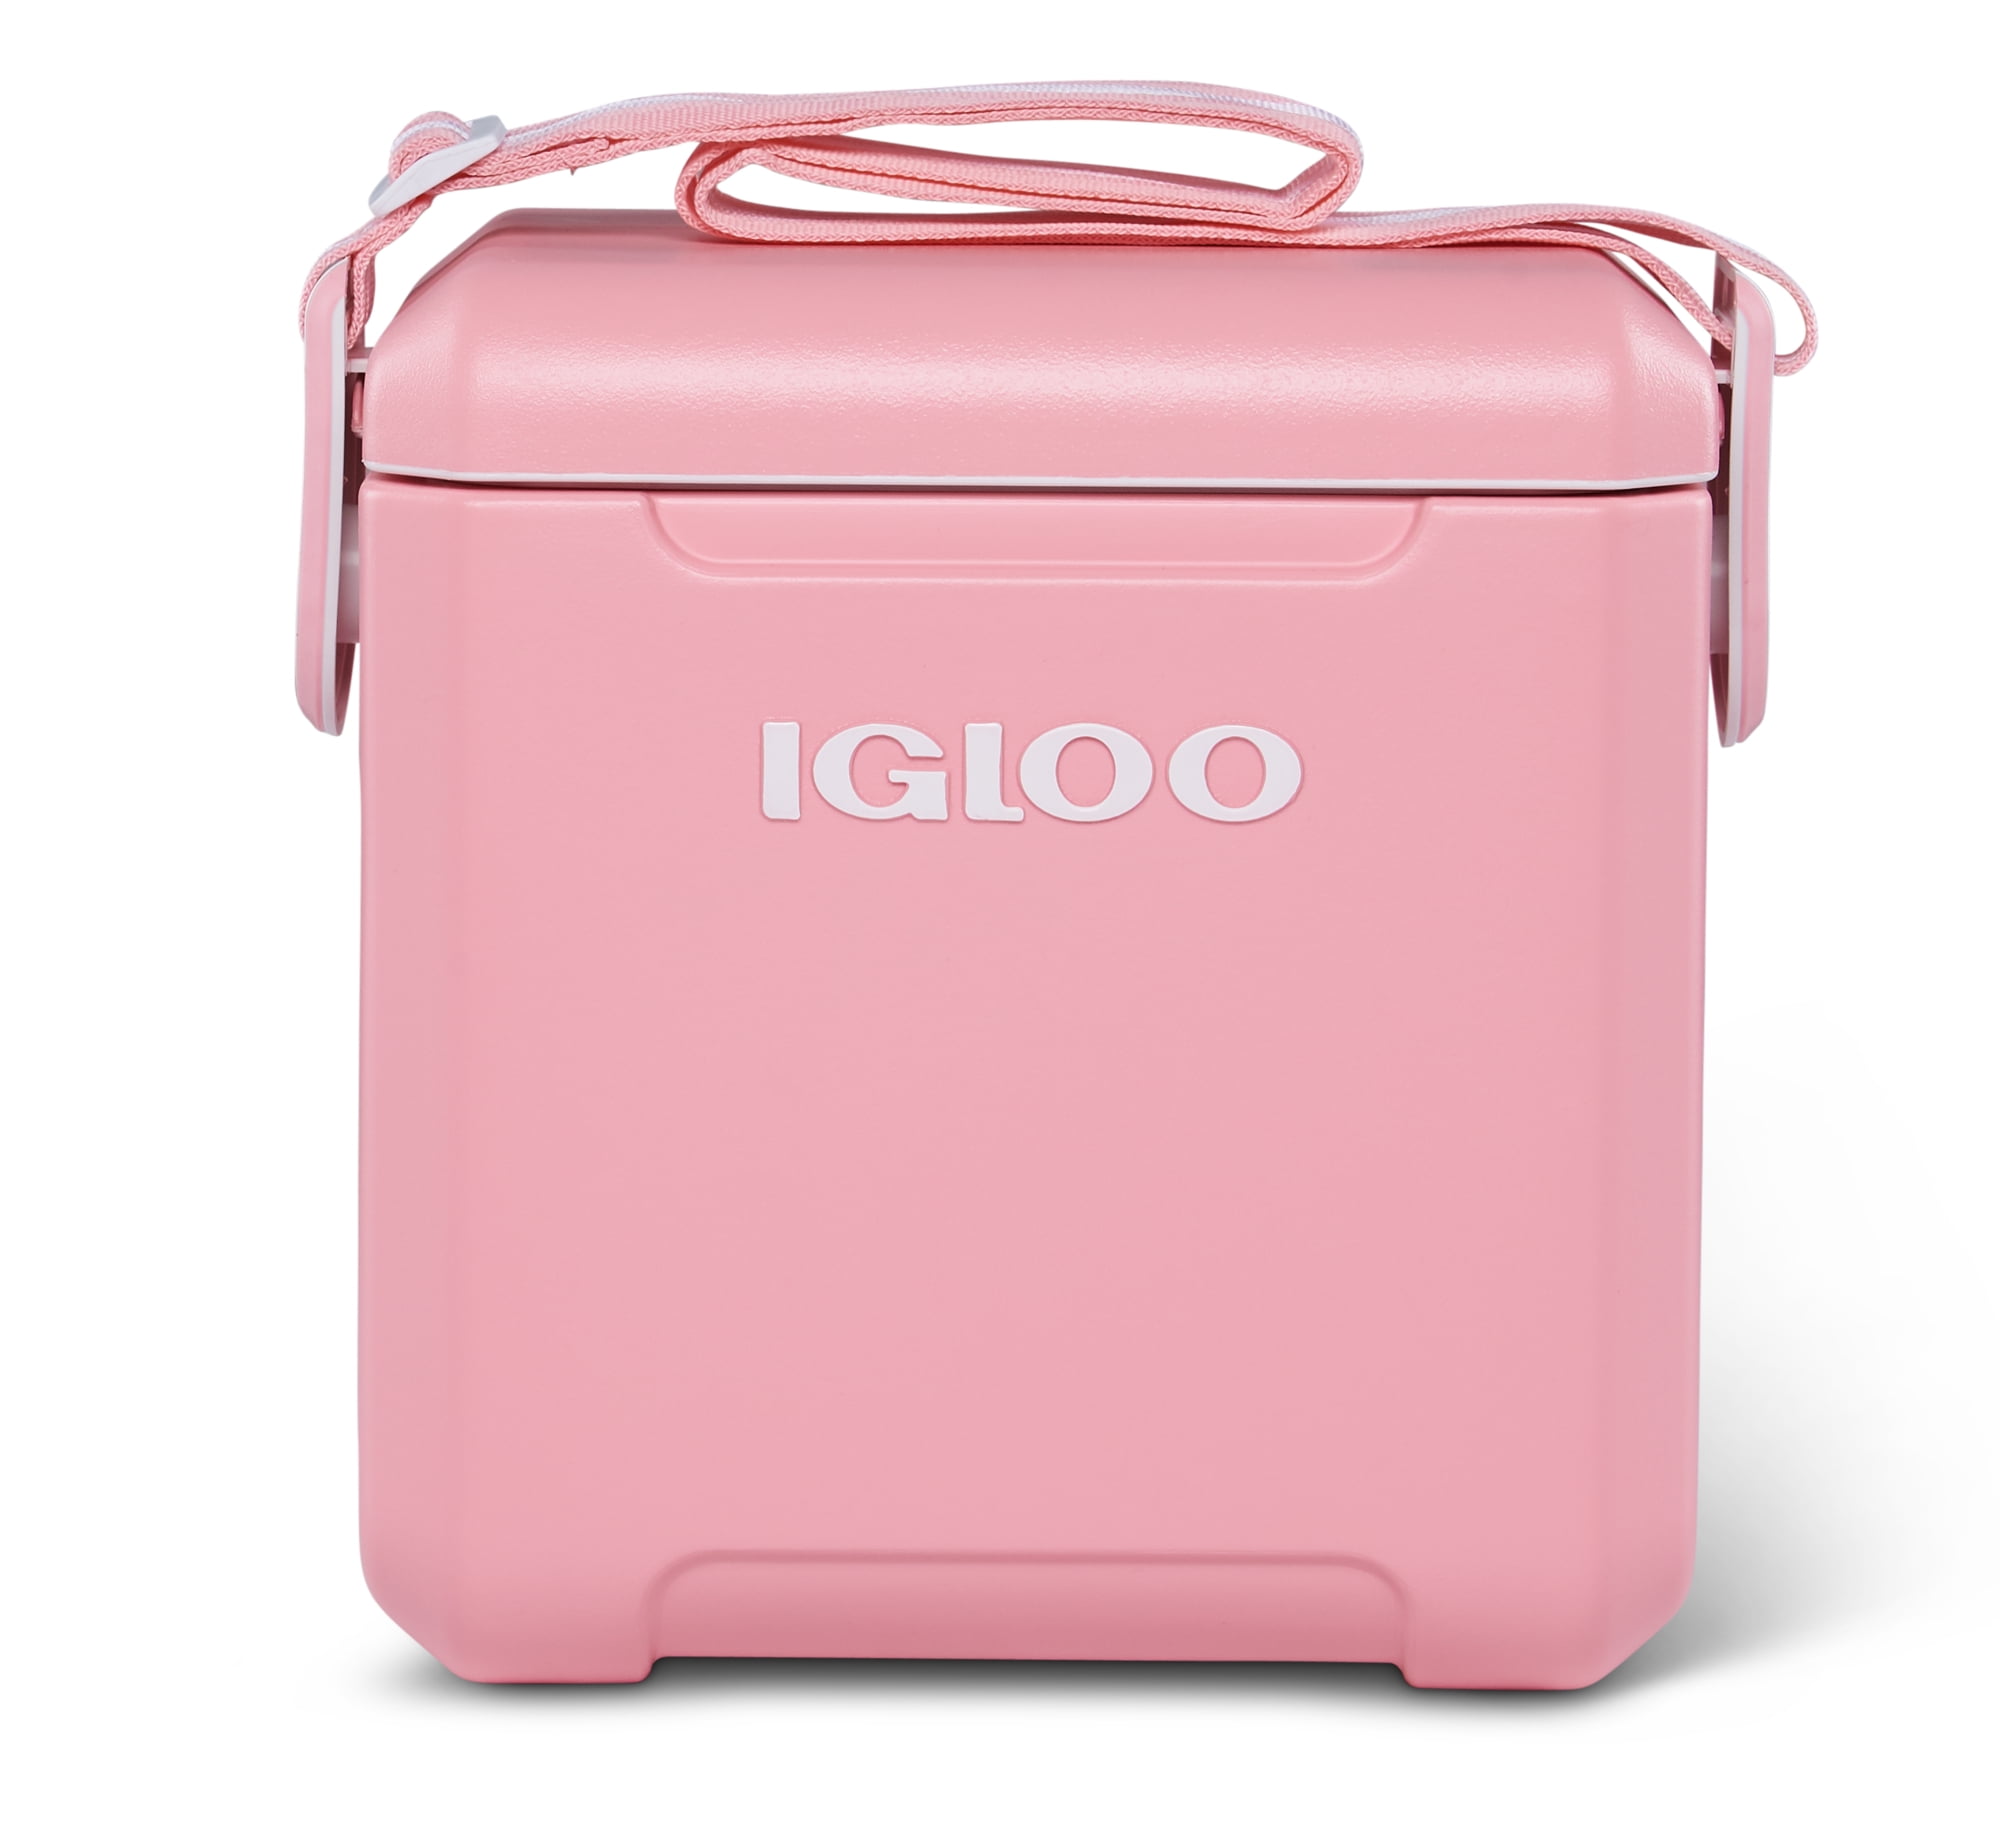 11-Quart Igloo Tag-a-Long Hard Sided Cooler w/ 14-Can Capacity (Blush or Turquoise Blue) $39.98 + Free Shipping